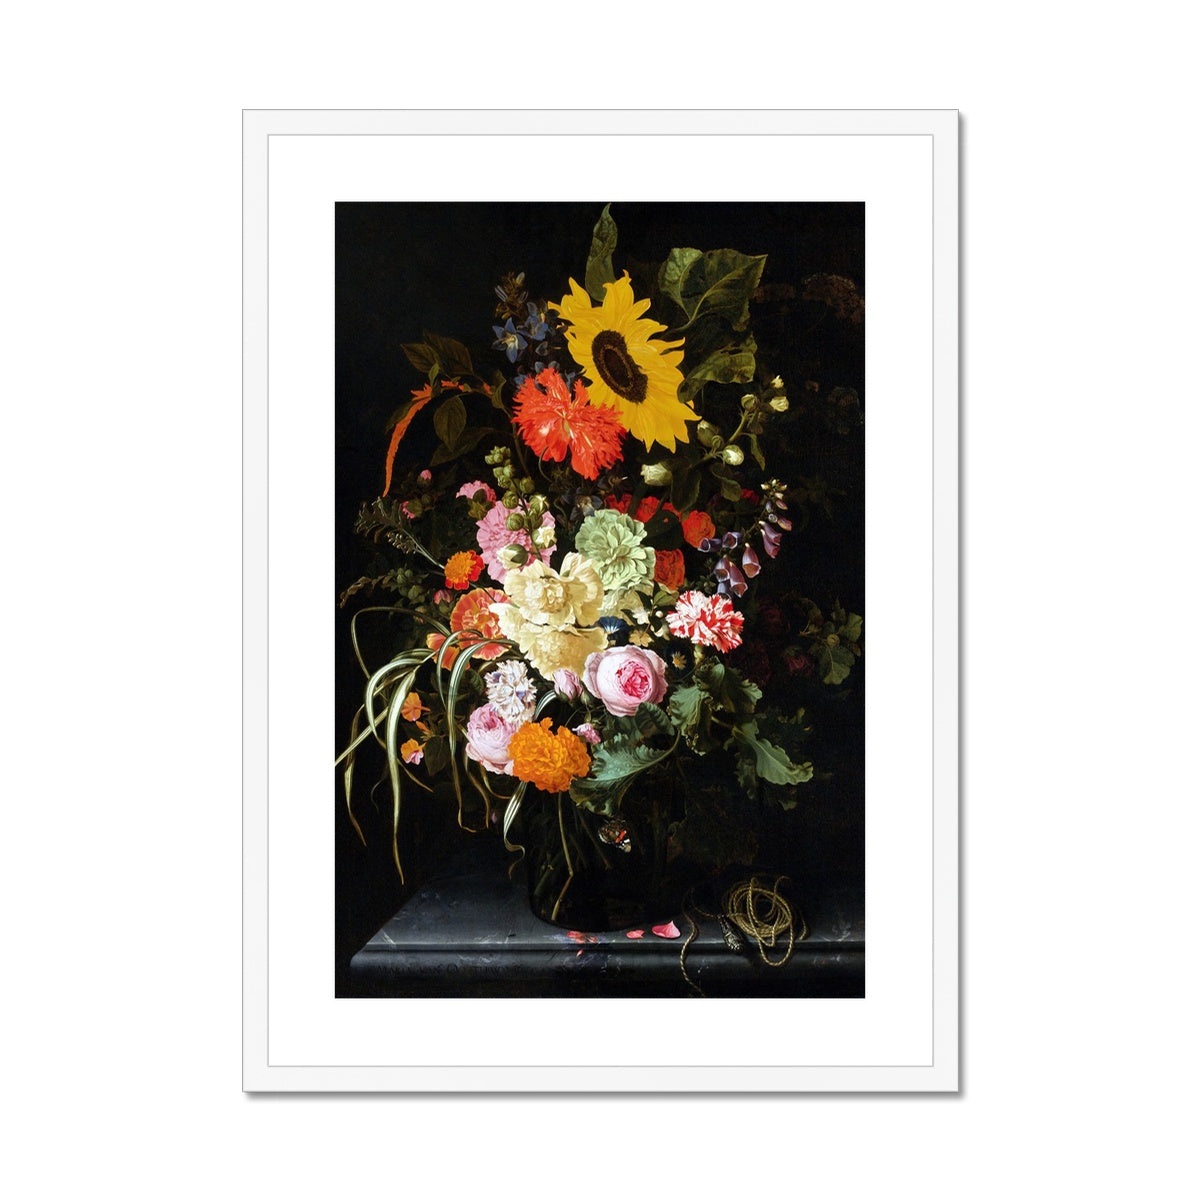 'Roses, Carnation, Marigolds and other Flowers with a Sunflower and Striped Grass'. Still Life by Maria van Oosterwijck. Framed Open Edition Fine Art Print. Historic Art